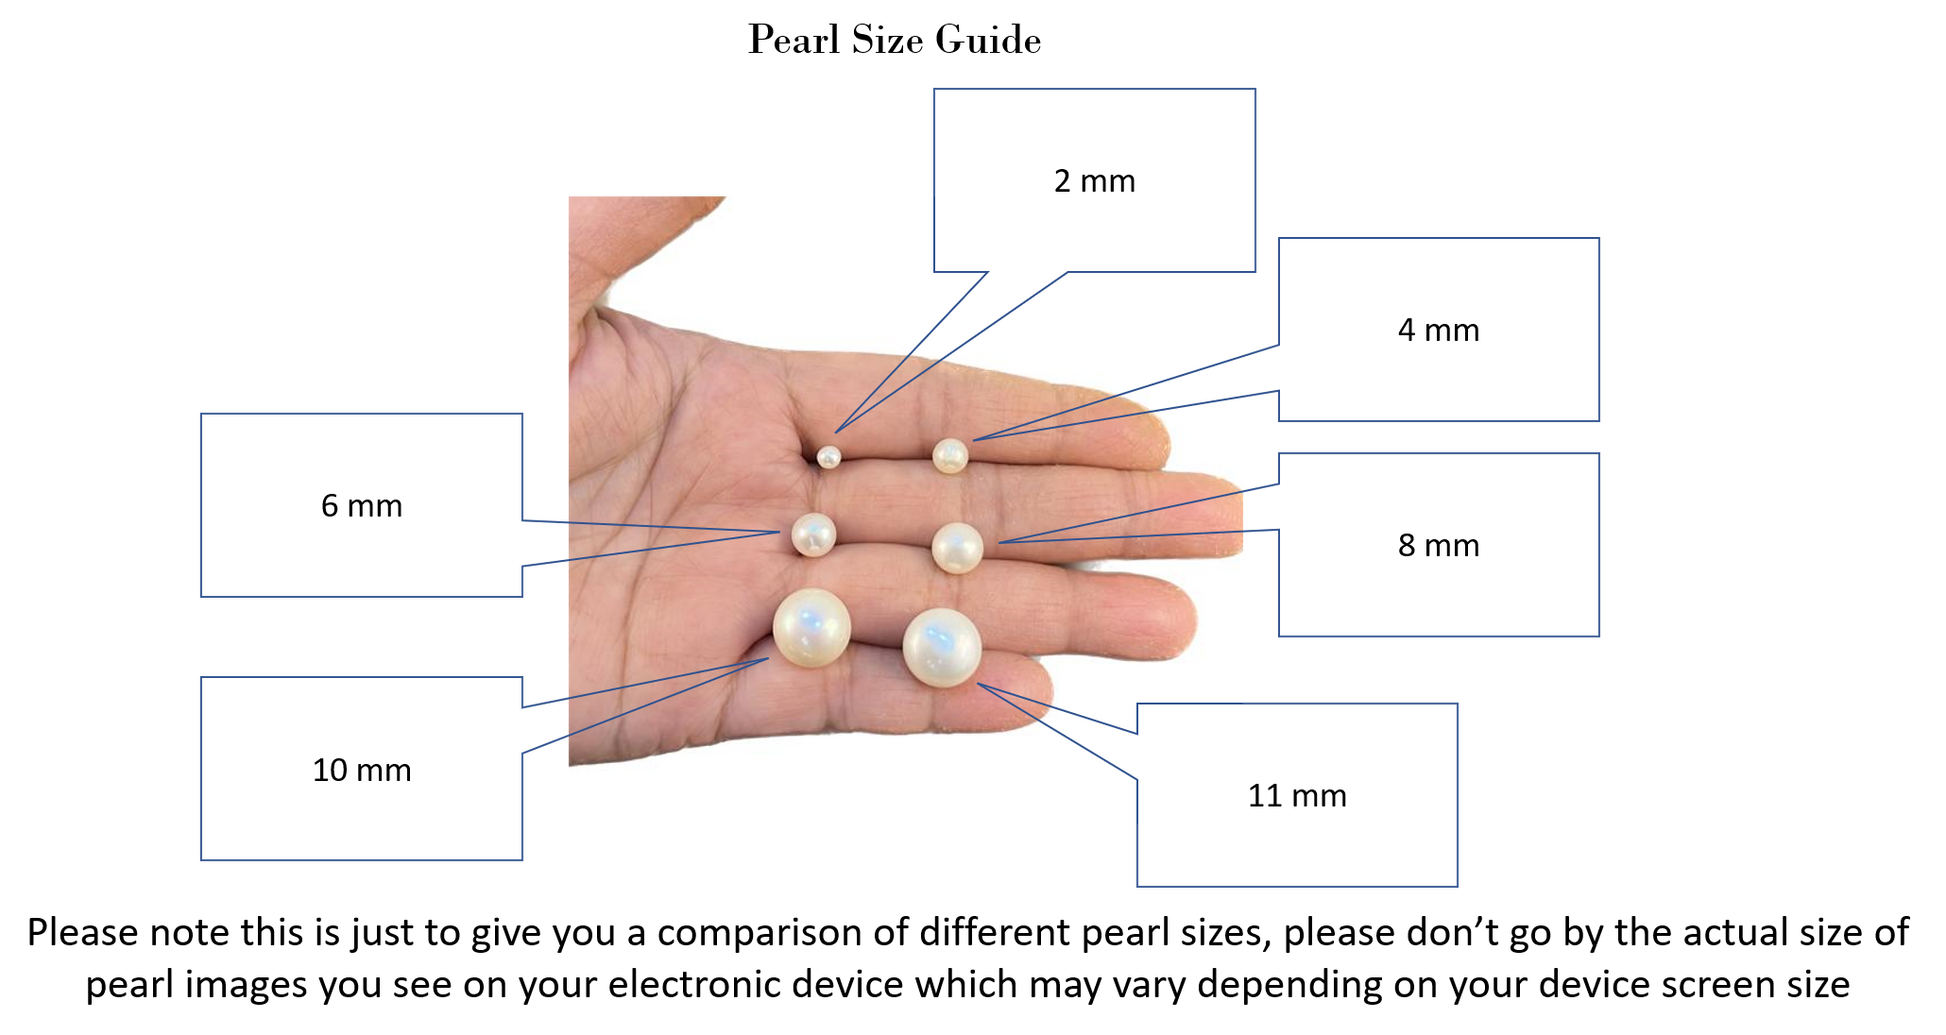 The Ultimate Guide to Pink Pearls and How to Wear Them - PearlsOnly ::  PearlsOnly